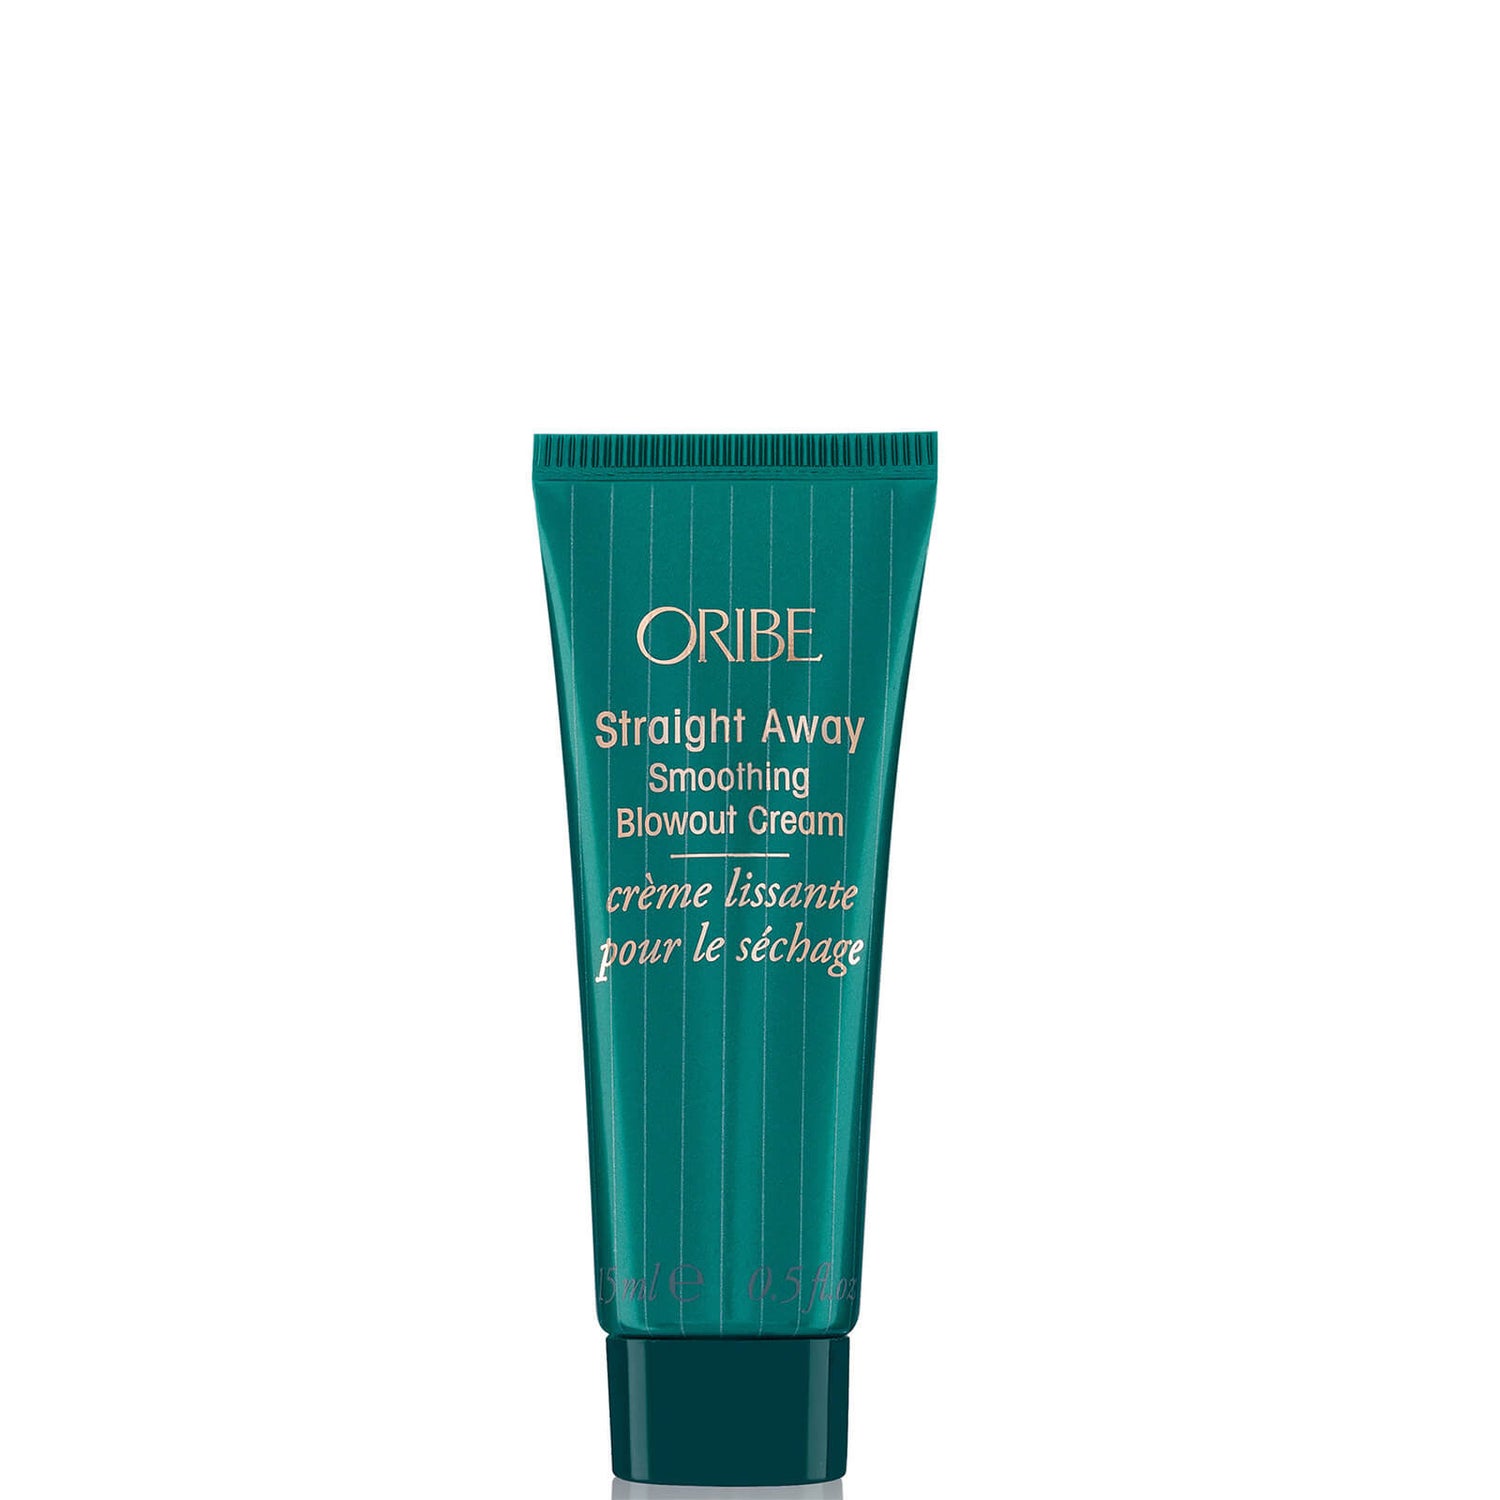 Oribe Straight Away Smoothing Blowout Cream Deluxe 15ml (Worth $10.00)